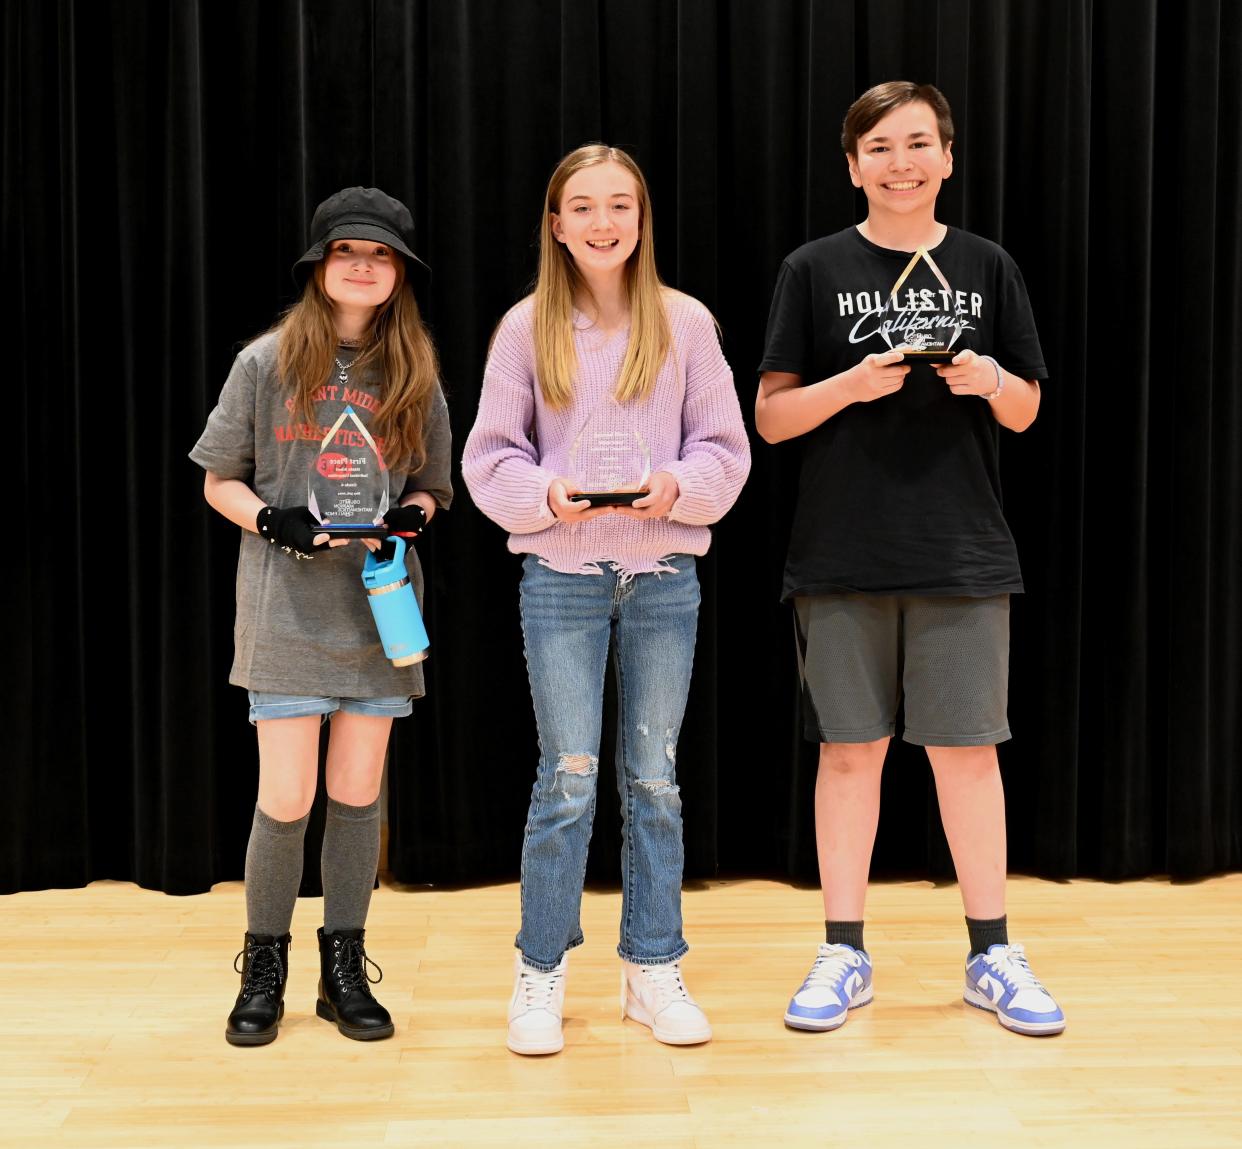 Taking top honors among sixth graders in the annual Math Challenge was Delia Messaros (left) from Grant Middle School. Mira Taylor from North Union Middle School (center) finished second while Chayton Stiles from Elgin Middle School was third.